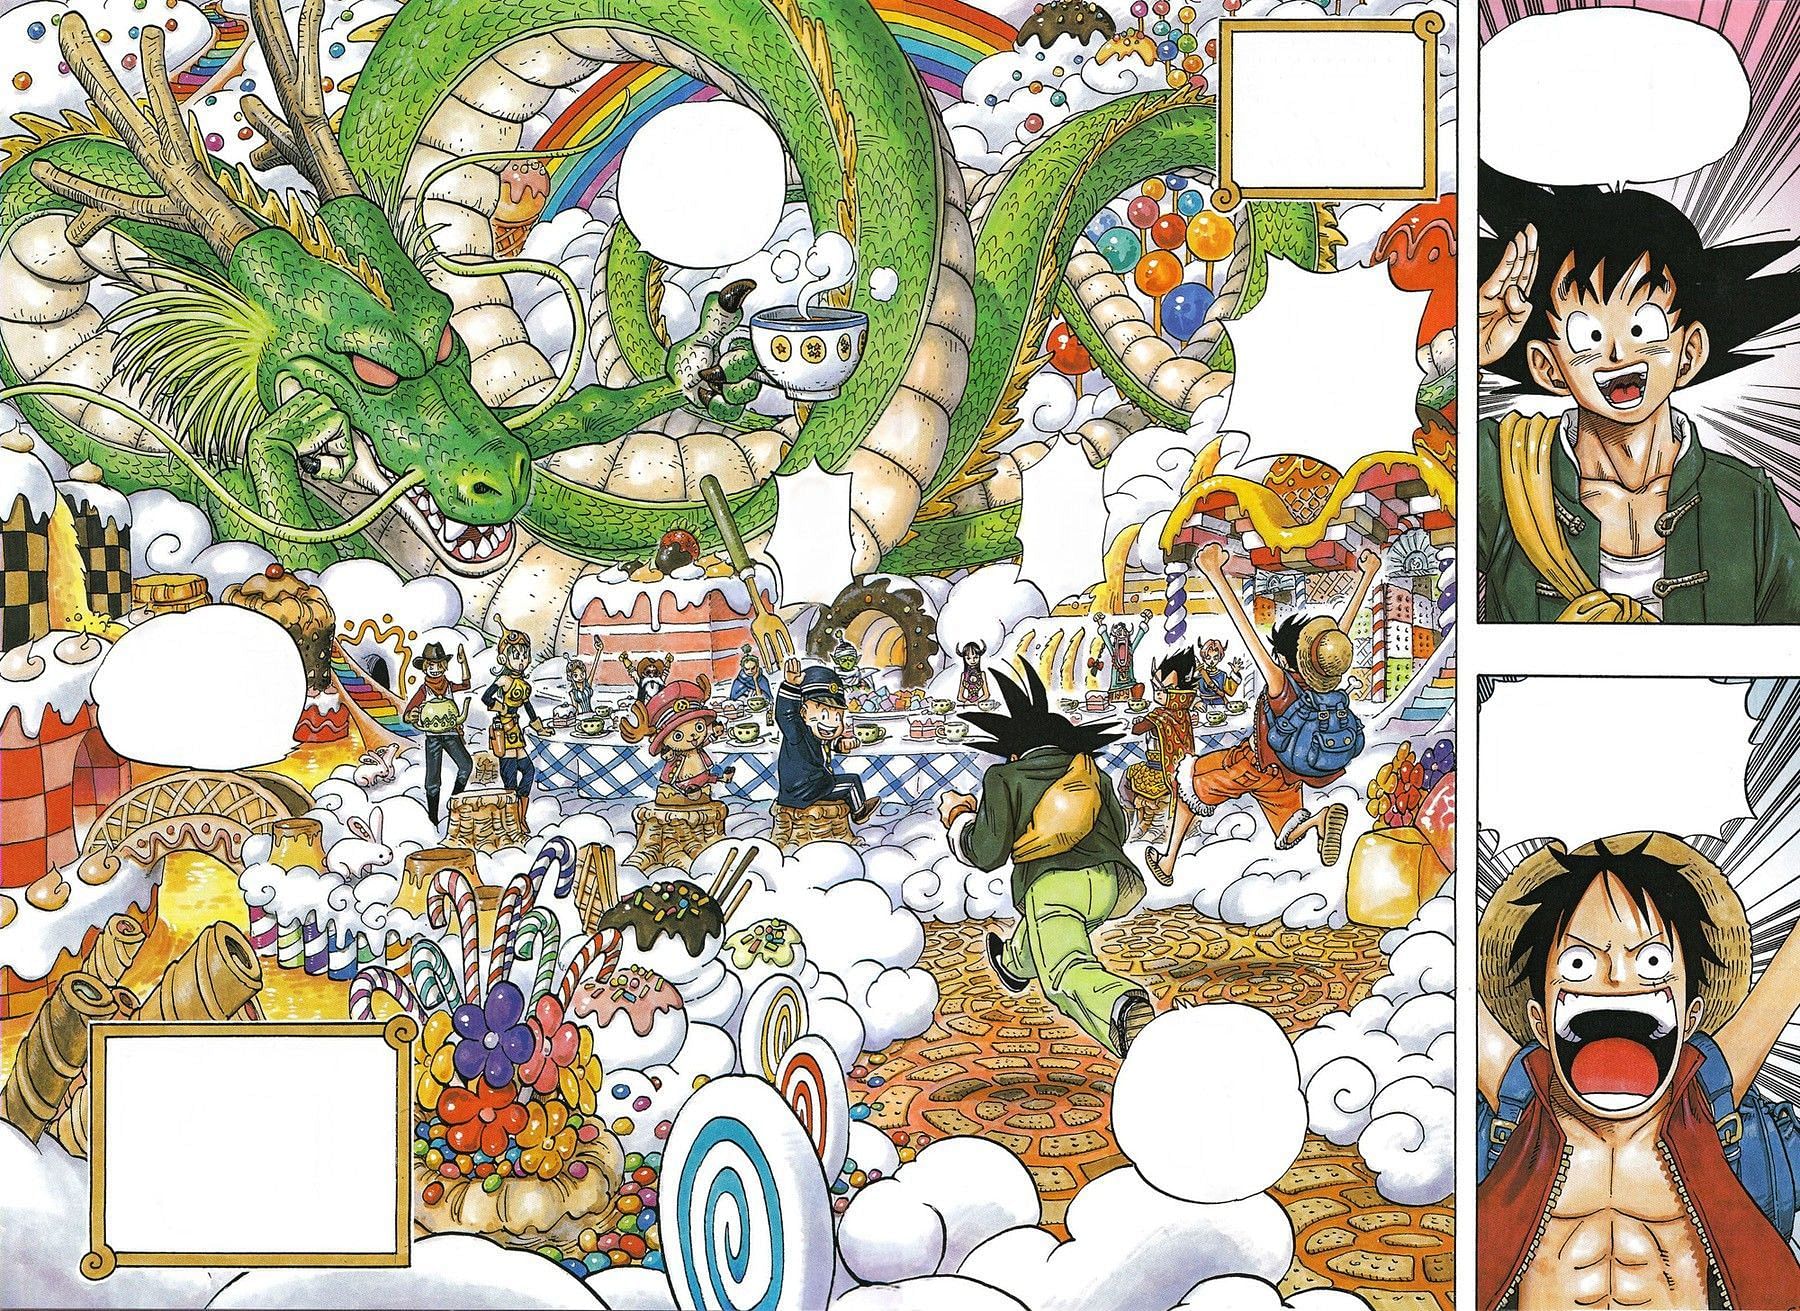 Why the Toriko x One Piece x DBZ Anime Crossover Was Possible